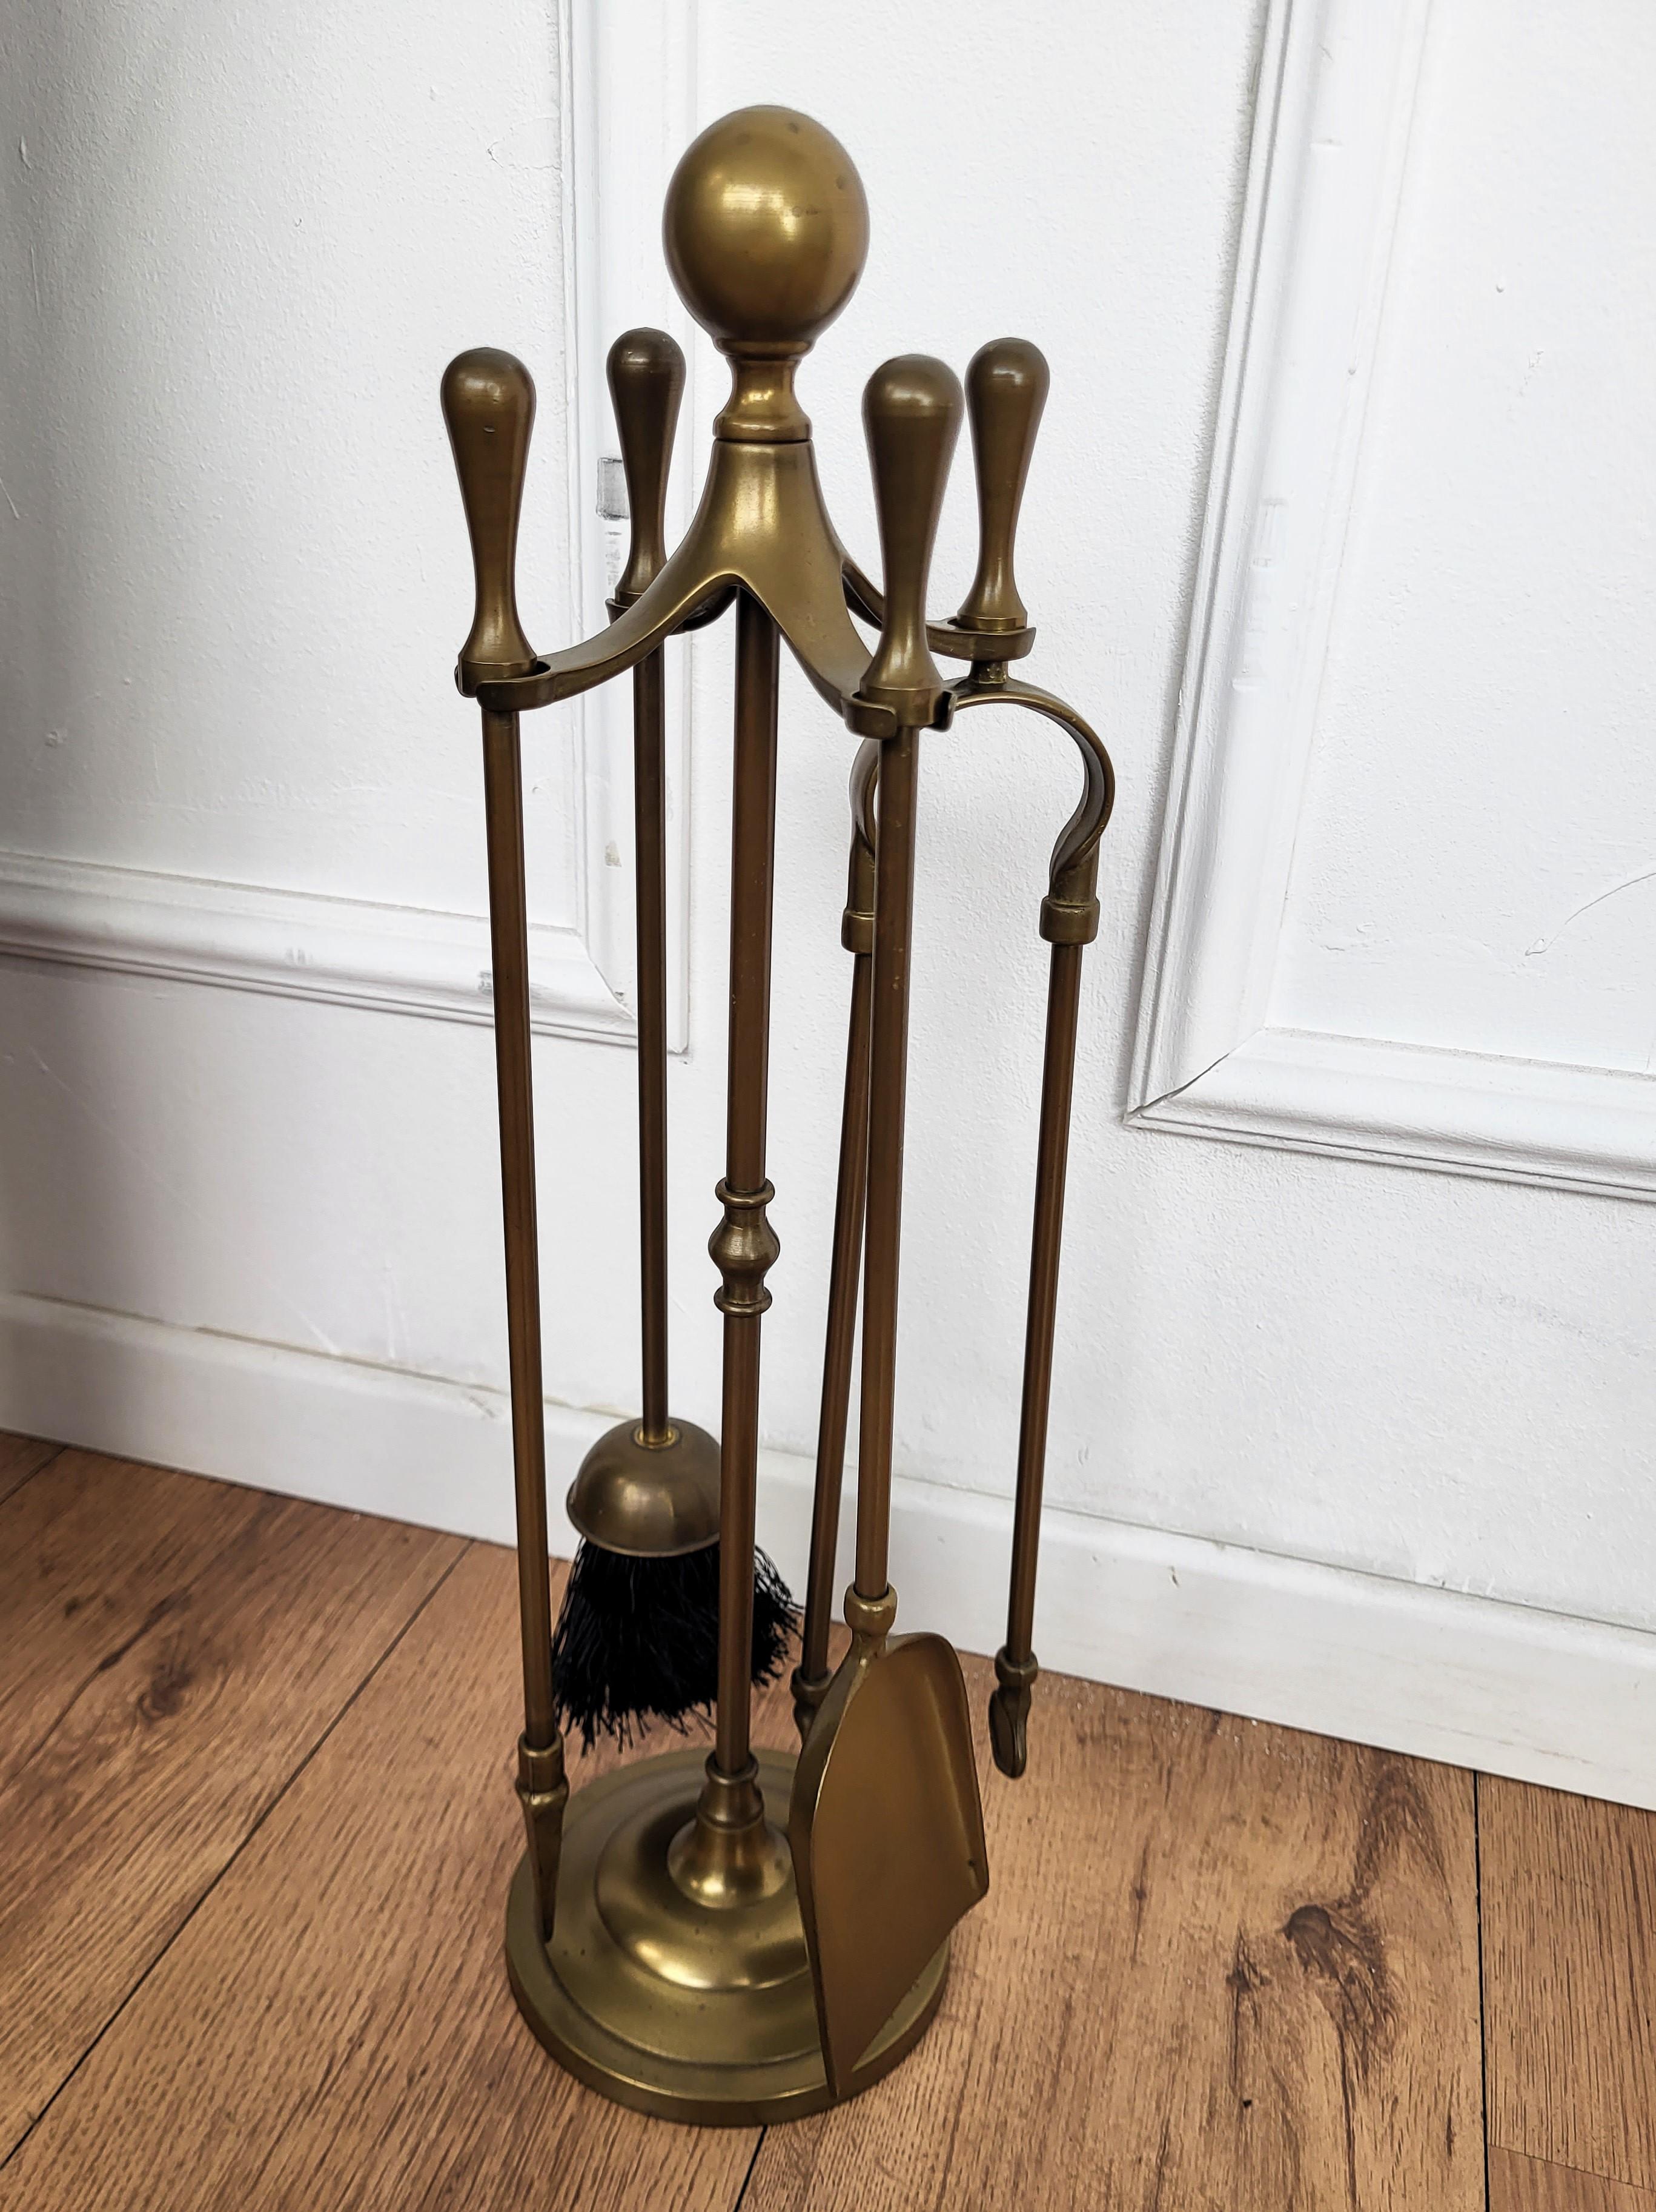 Italian brass four-piece fire tool set with stand. The set consists of a poker, a shovel and a pair of tongs, each with an ornate handle such as the stand. 

